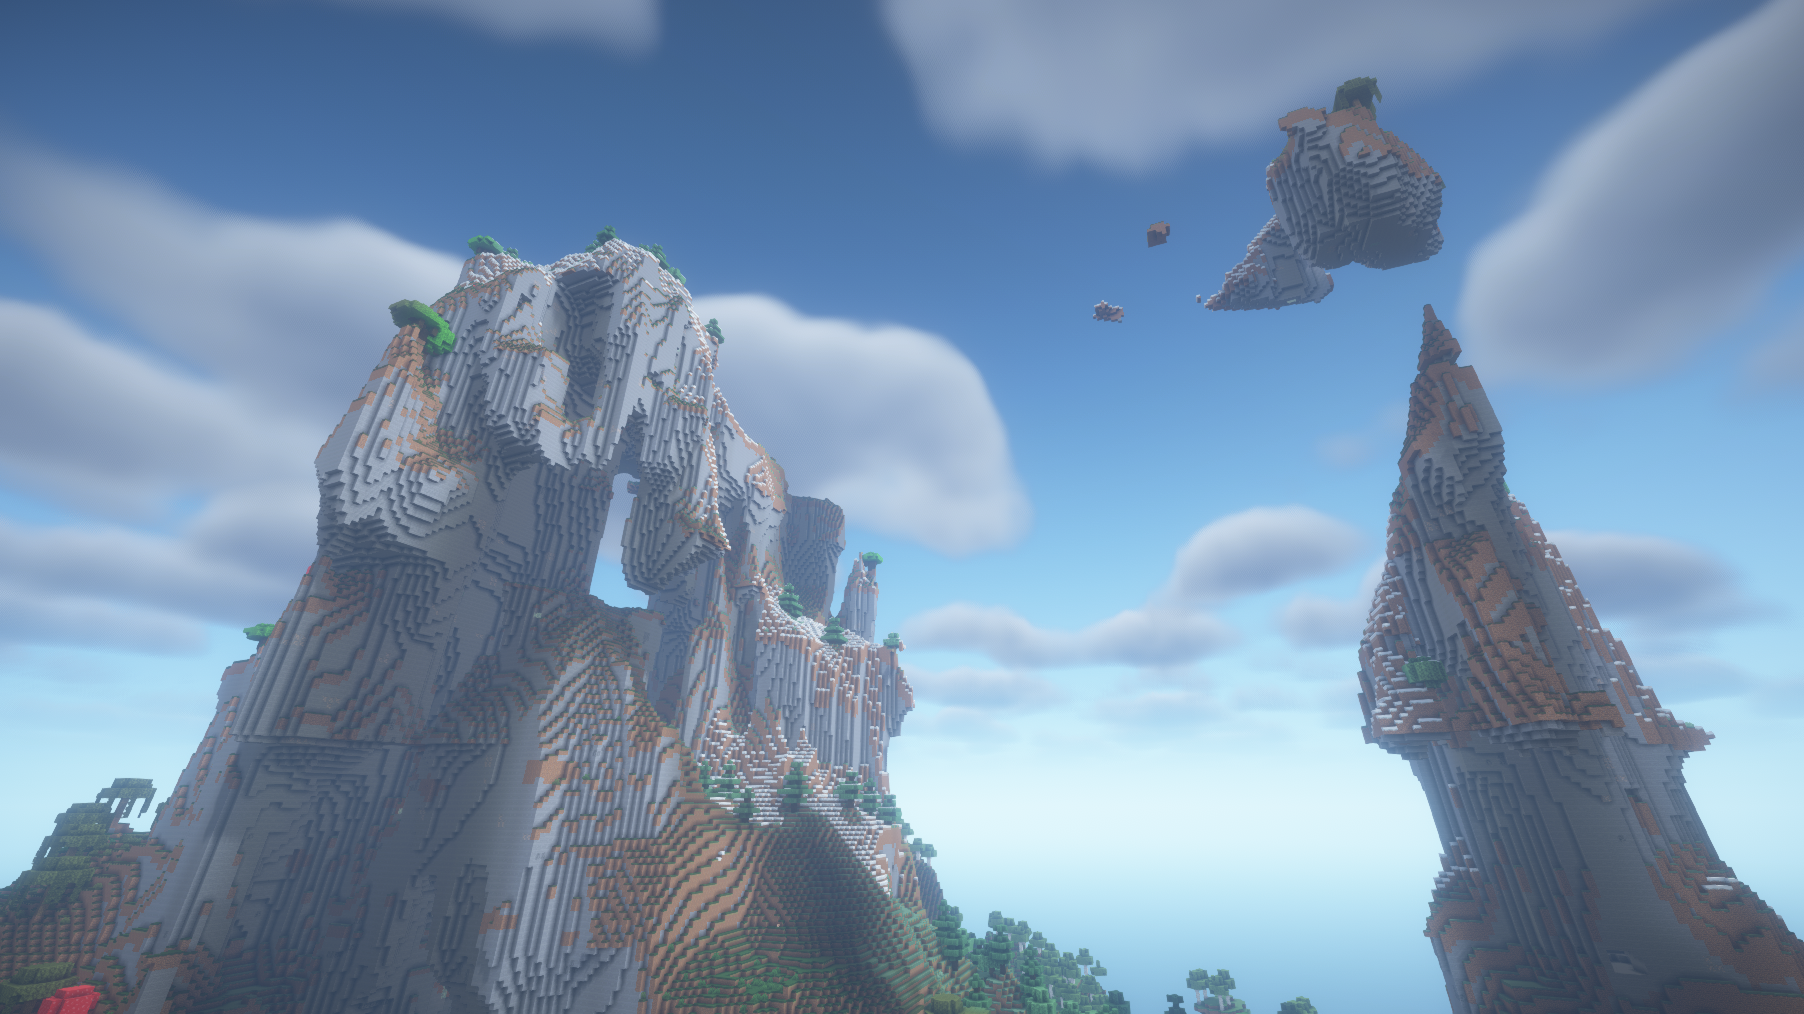 This is how the amplified terrain looks with bsl shaders